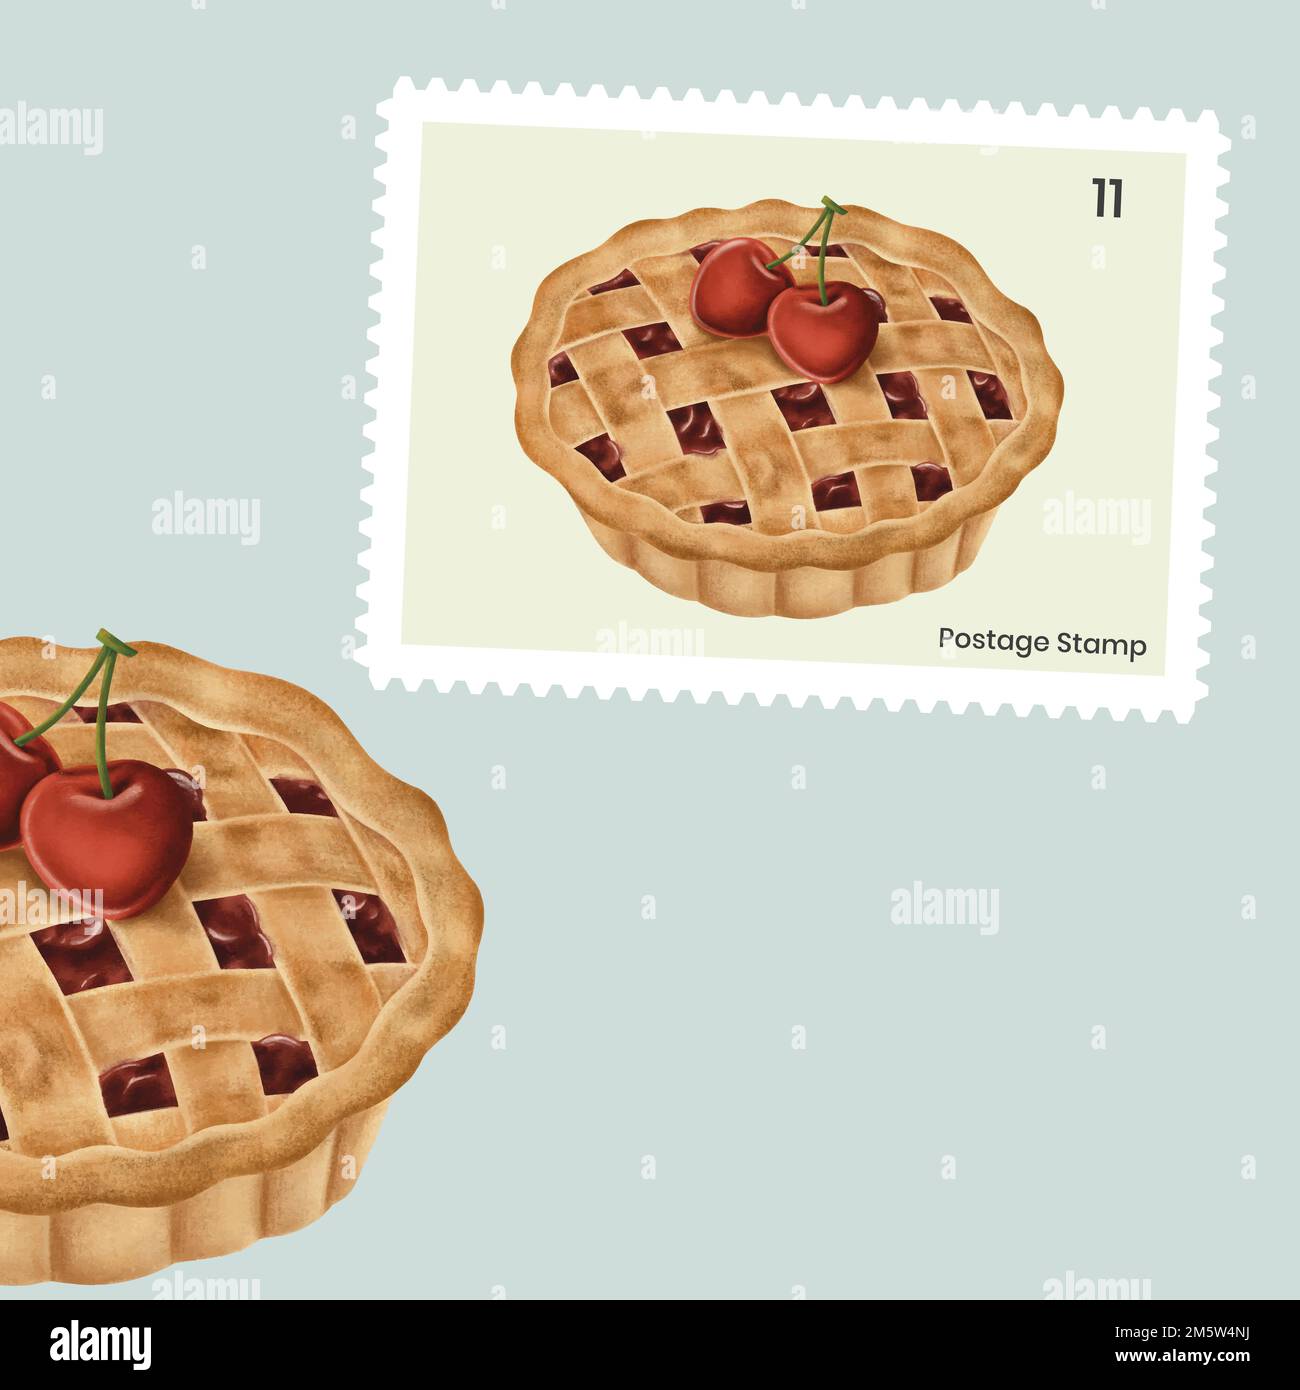 Cute cherry pie on a postage stamp vector Stock Vector